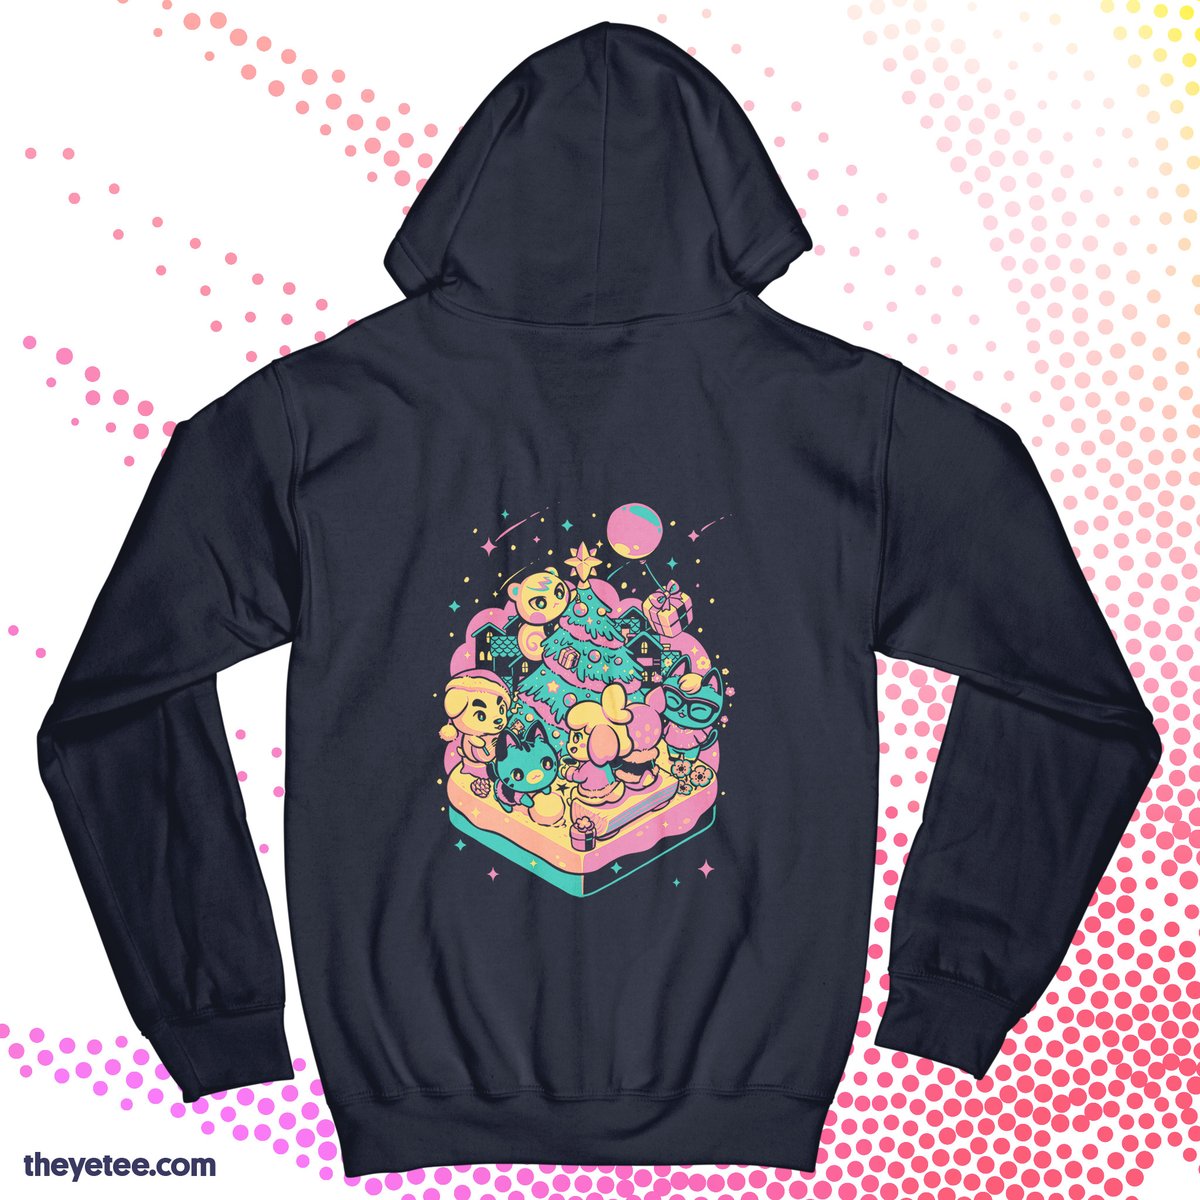 「Something about this season really bring」|The Yetee 🌈のイラスト